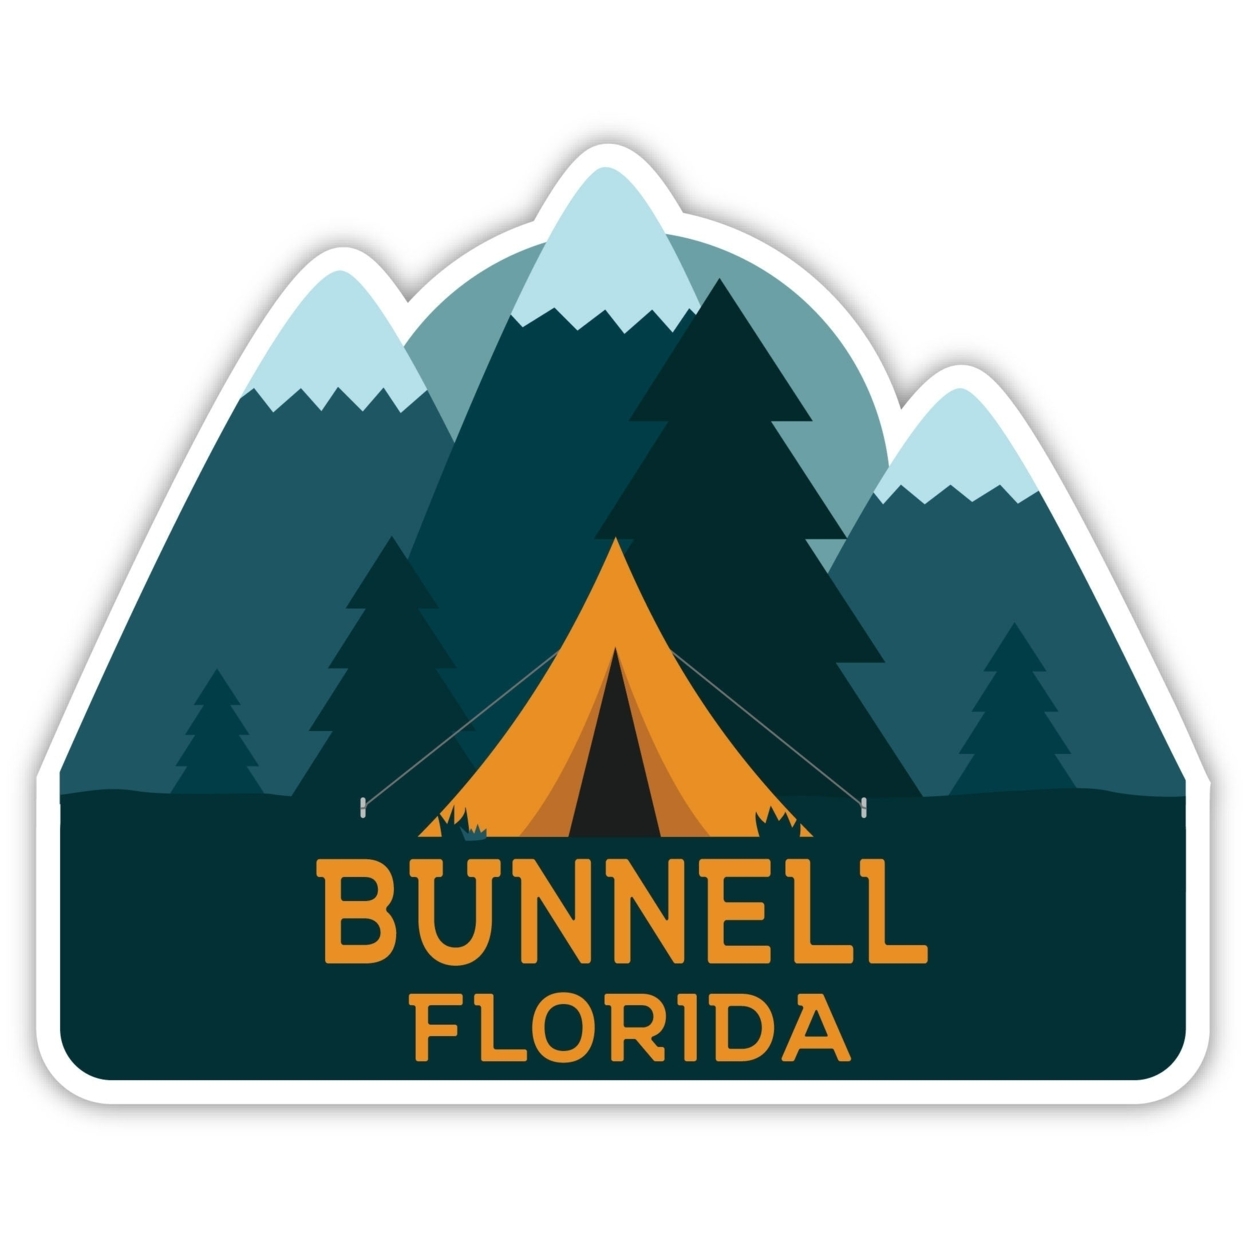 Bunnell Florida Souvenir Decorative Stickers (Choose Theme And Size) - 4-Pack, 6-Inch, Tent